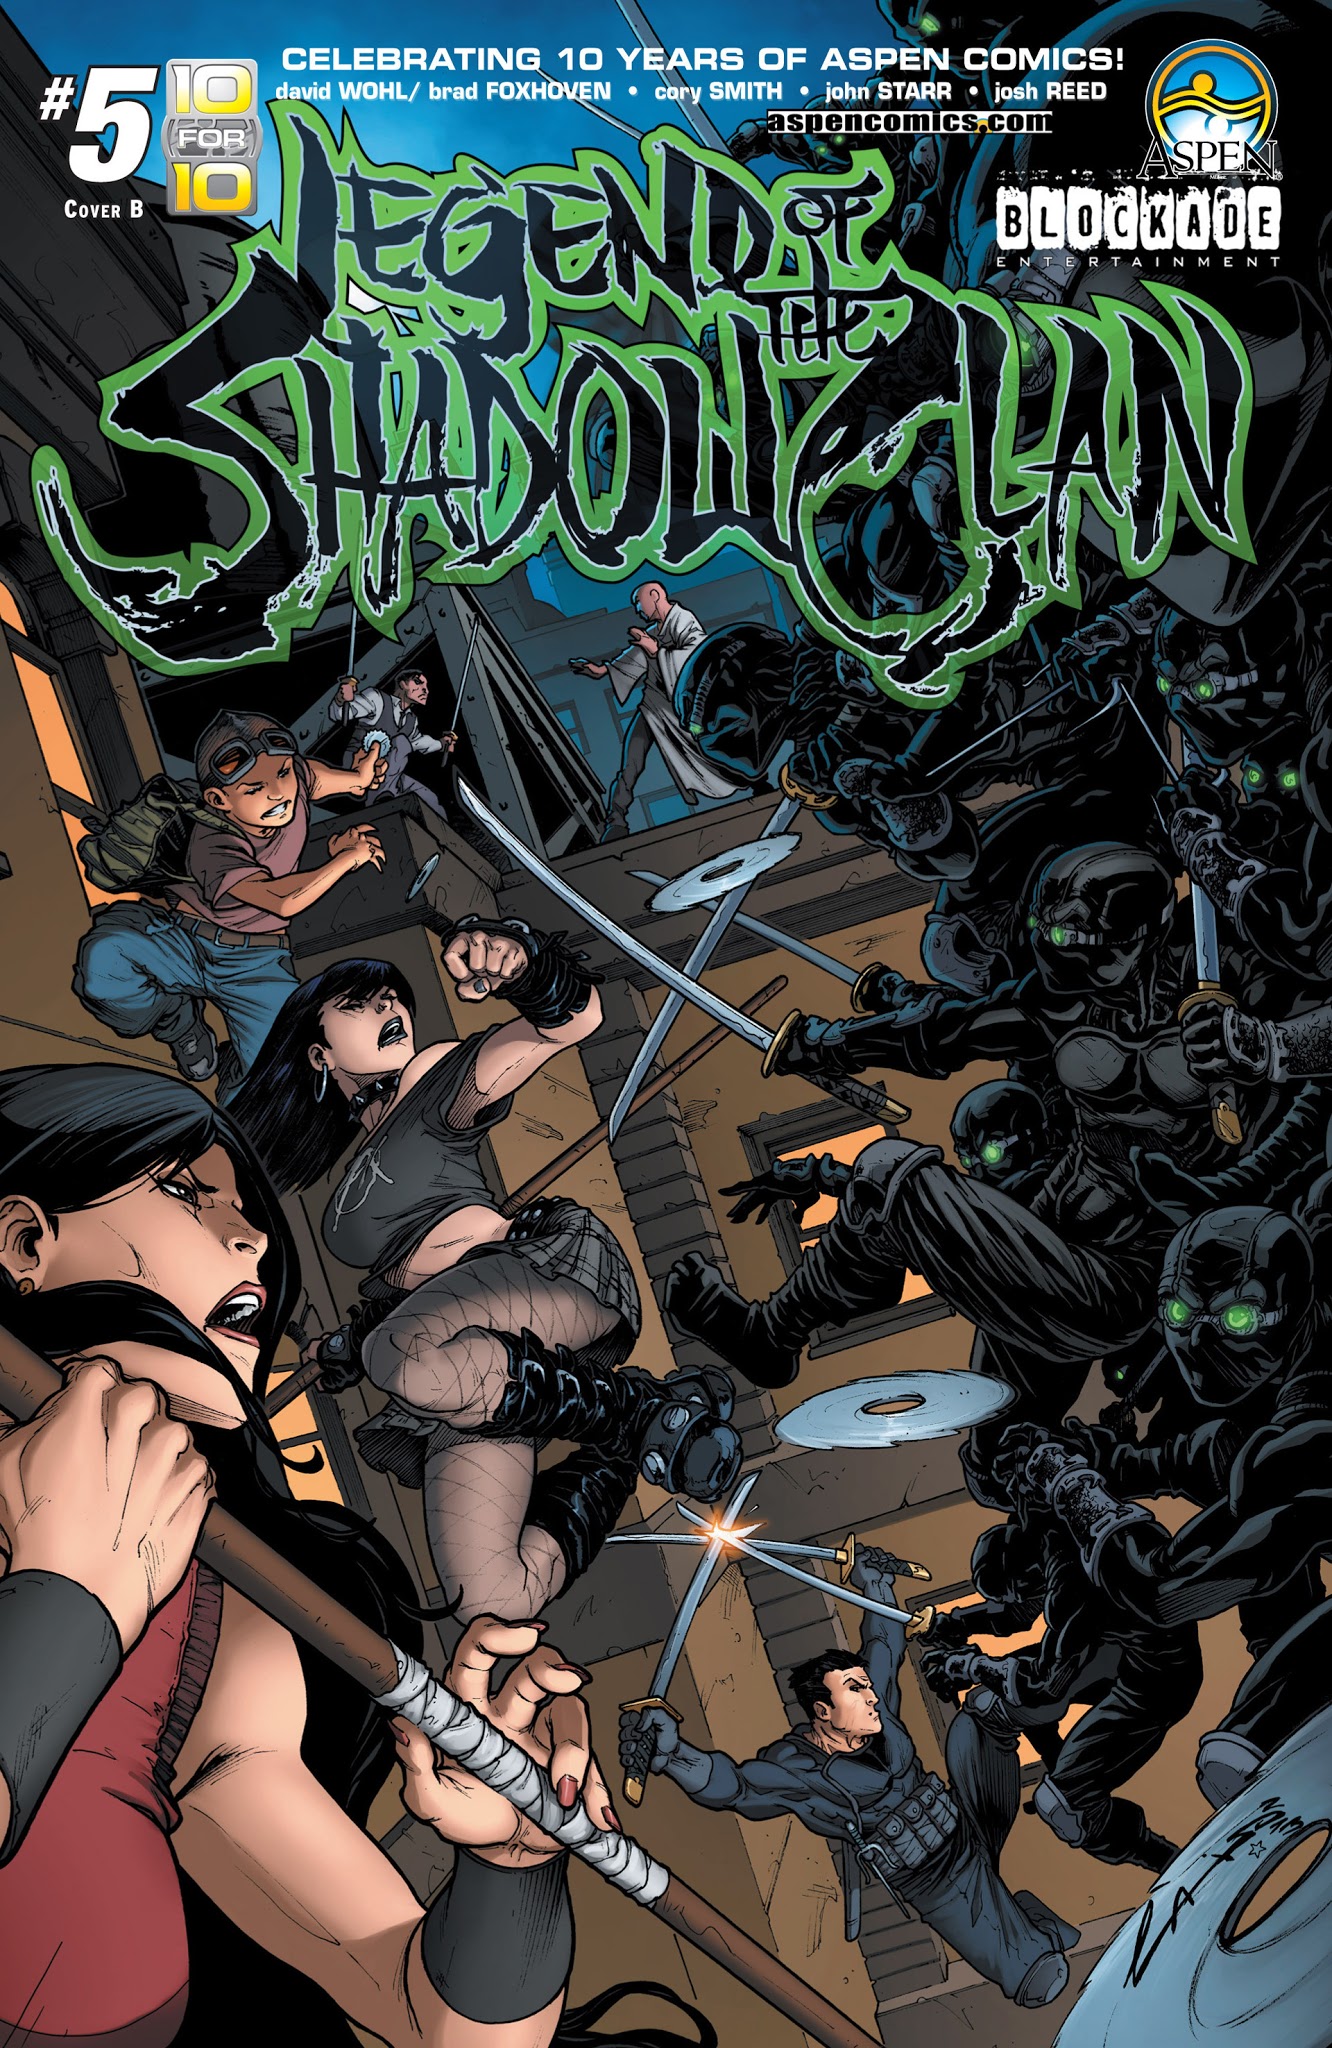 Read online Legend of the Shadow Clan comic -  Issue #5 - 2